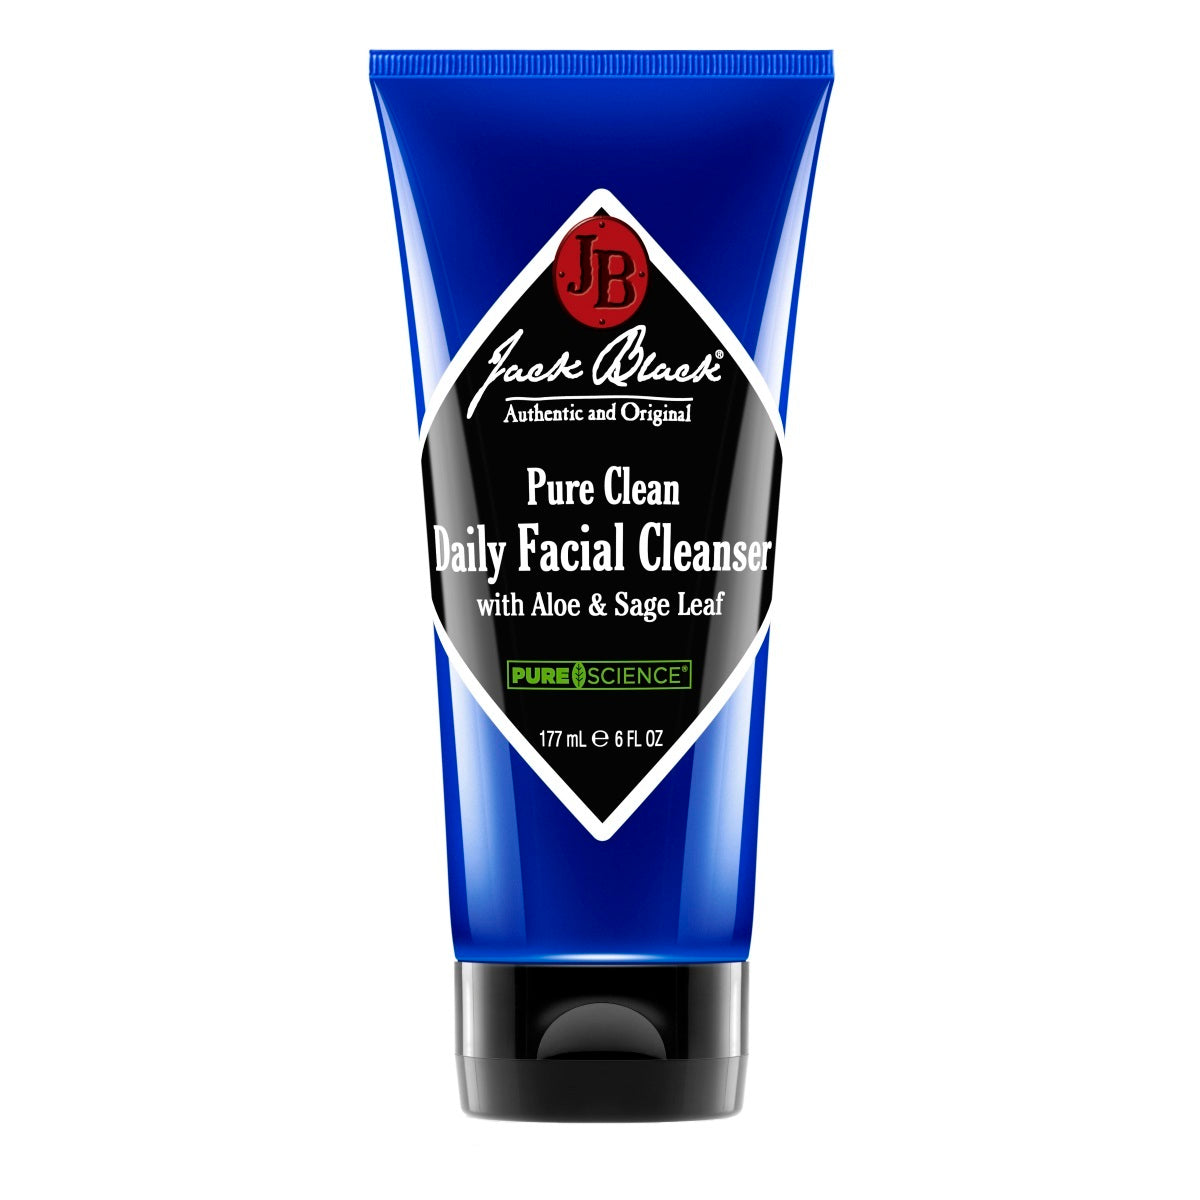 Primary image of Pure Clean Facial Cleanser